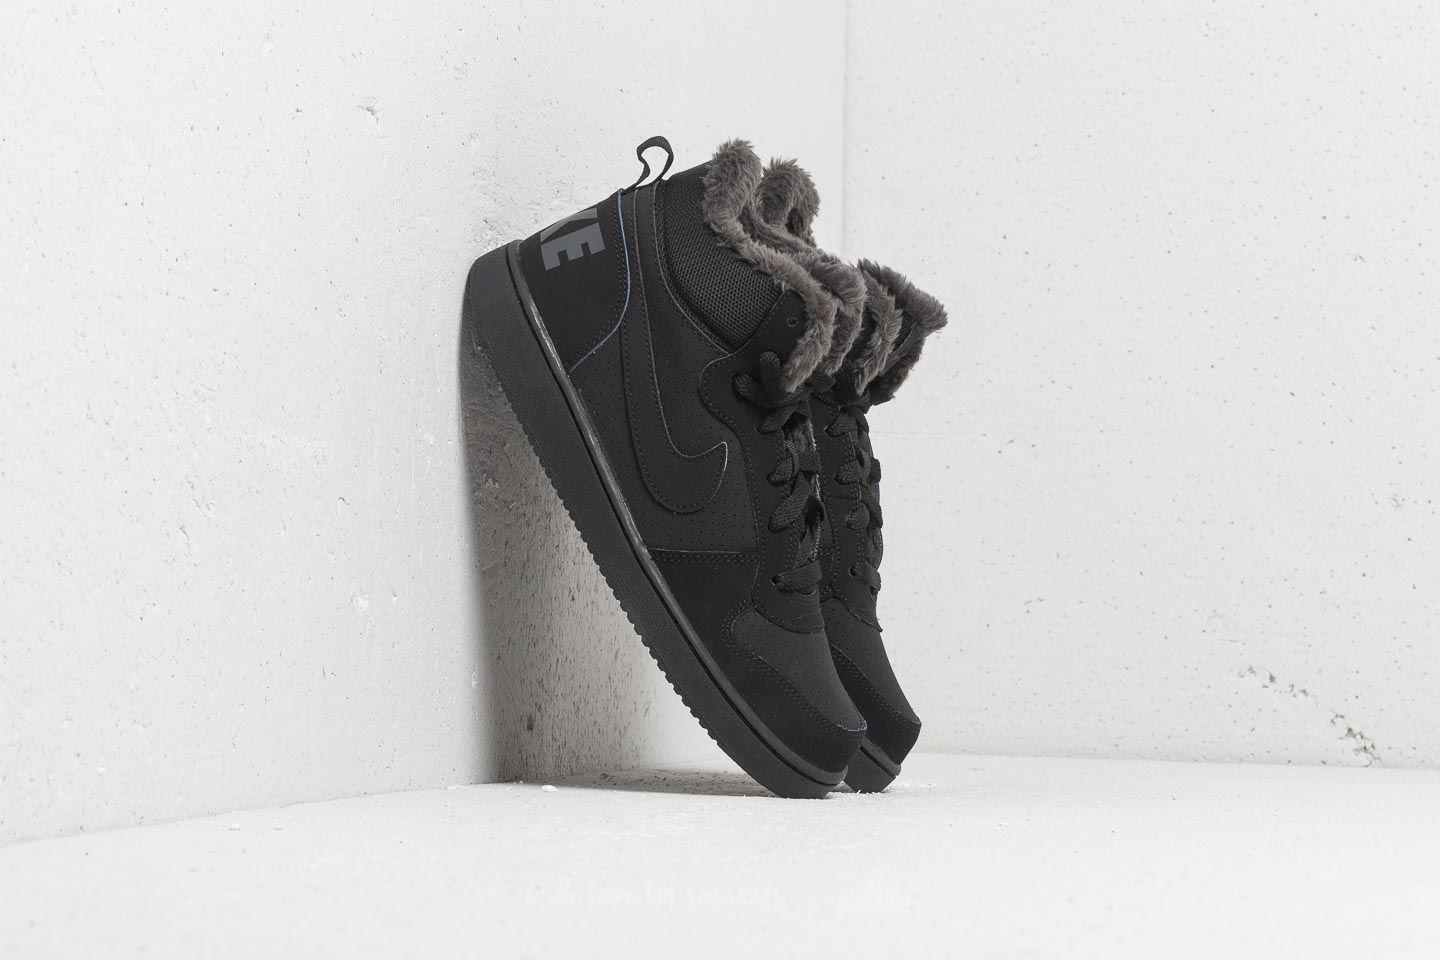 Nike Leather Court Borough Mid Winter (gs) Black/ Black-anthracite | Lyst